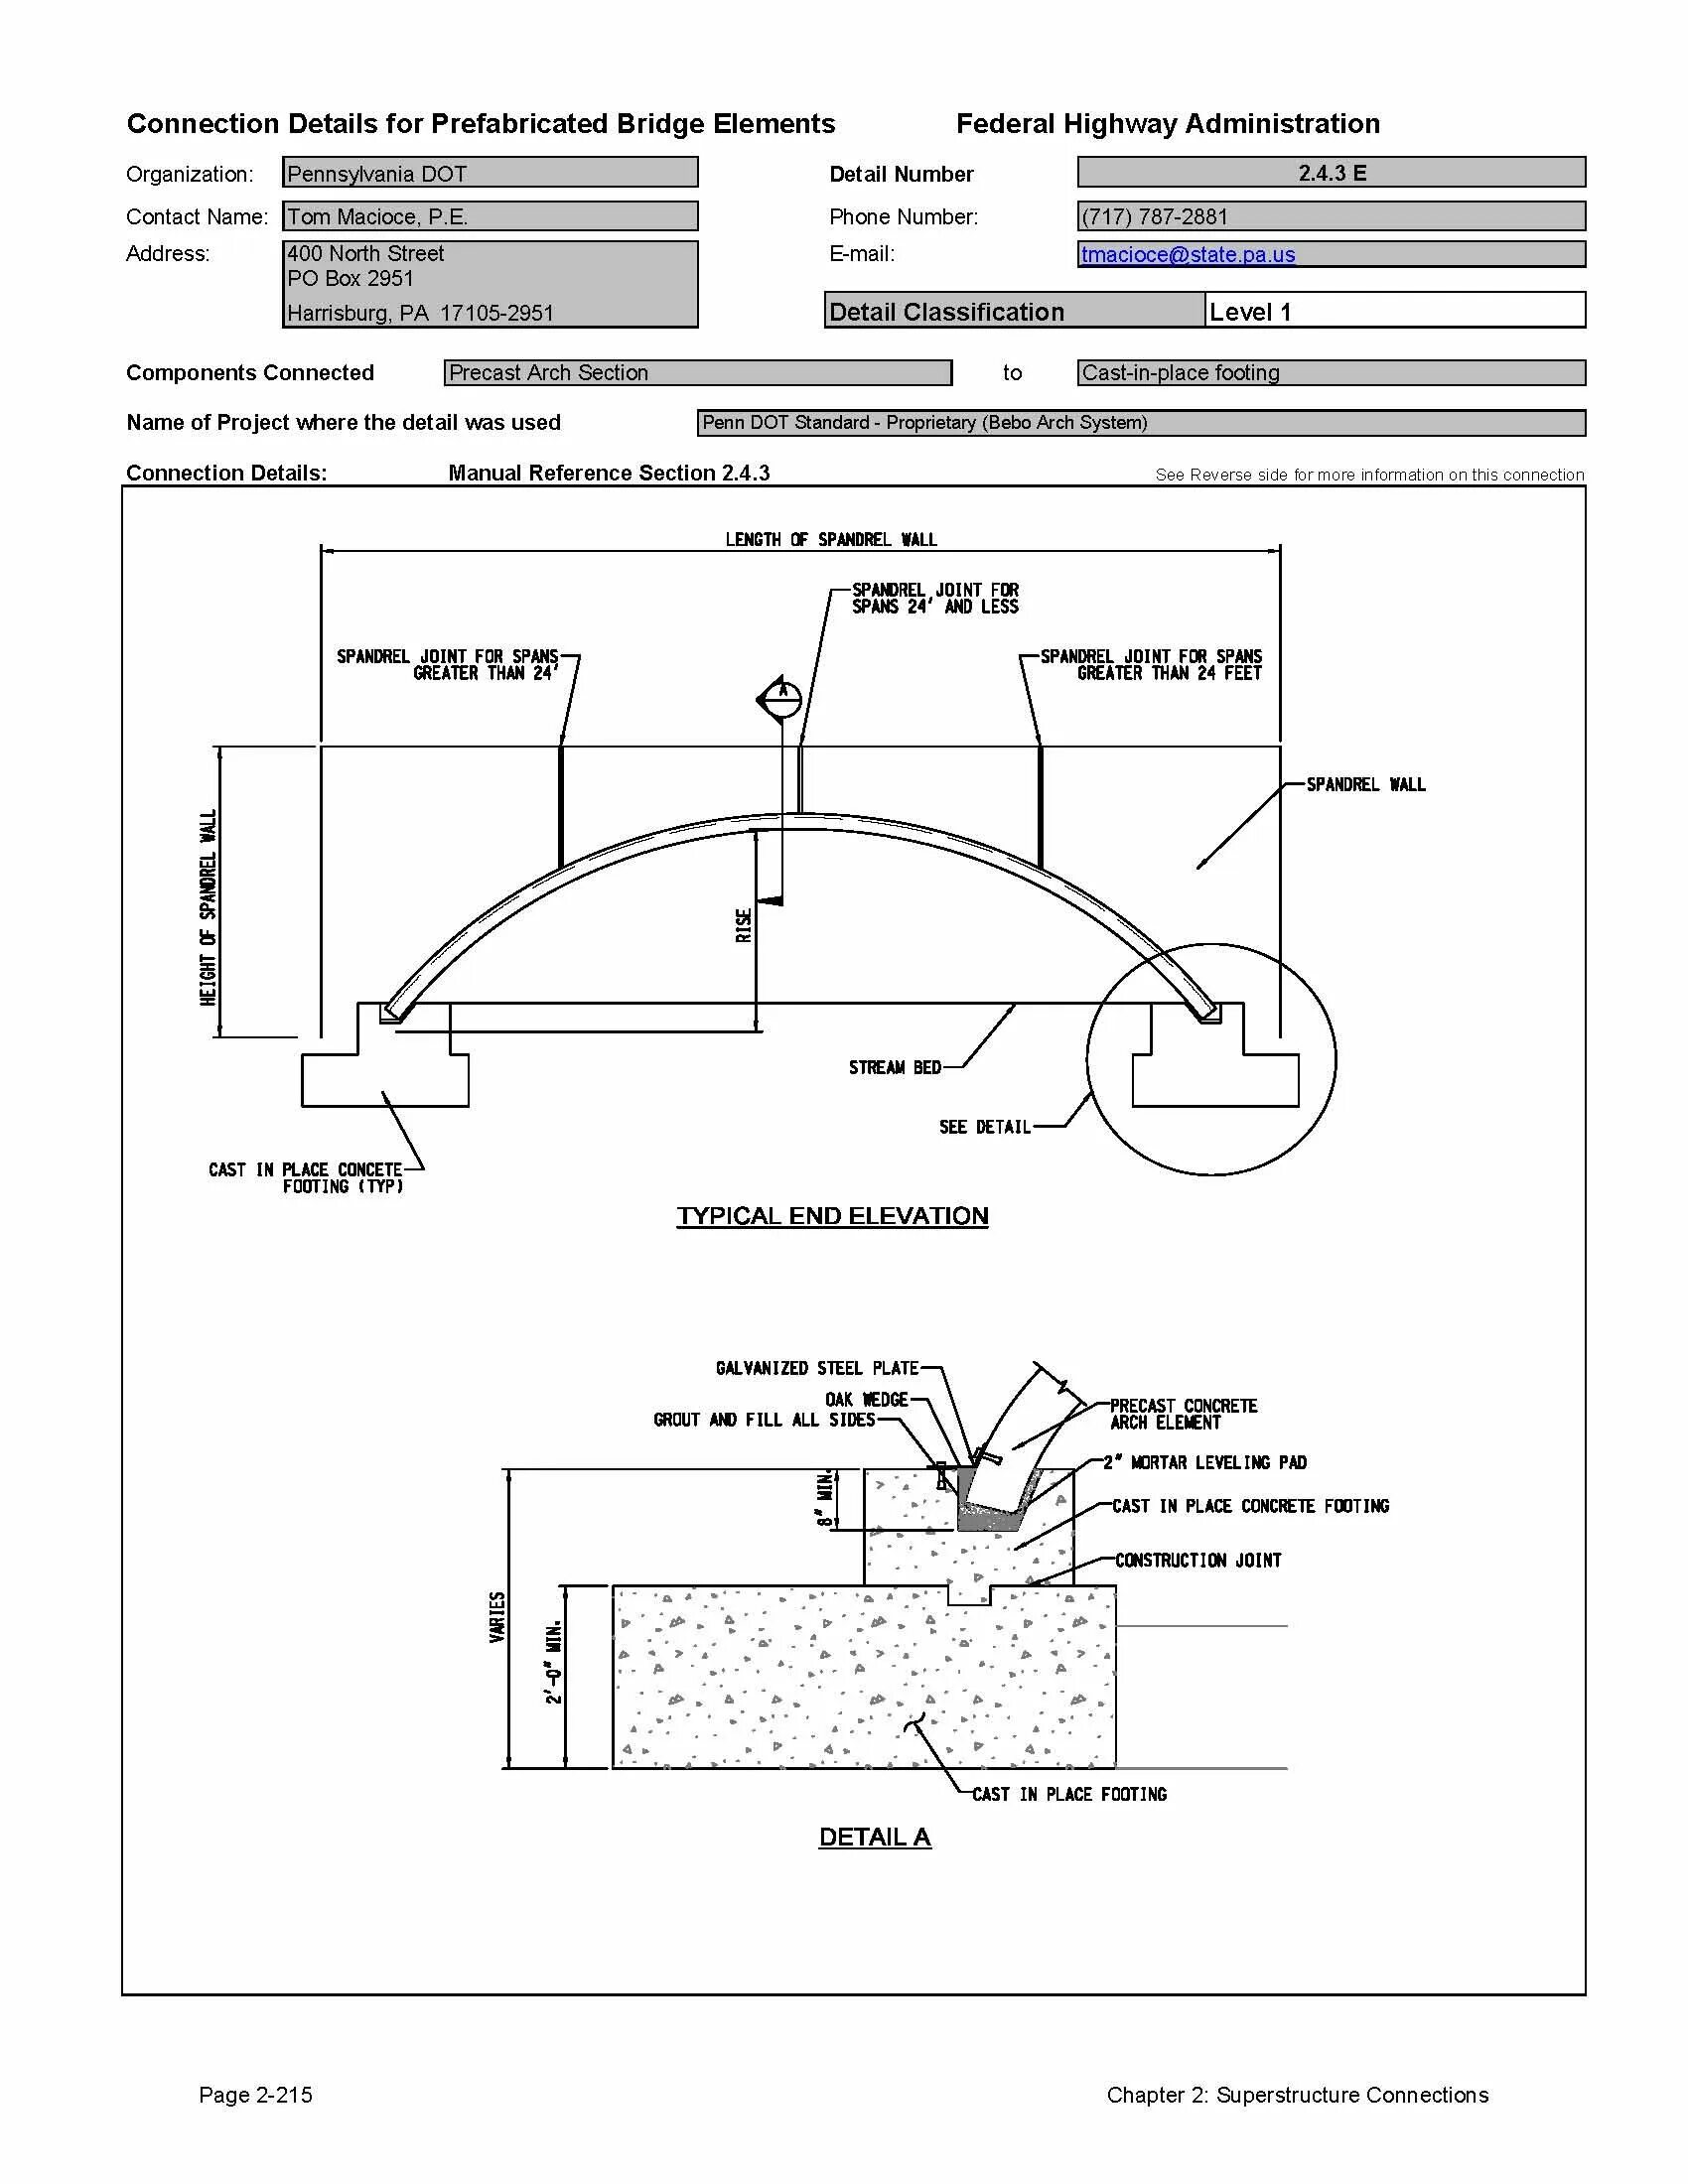 Fixed Arch. Incision Arch. Design Standard for the Bridge. Details Page. Connection details